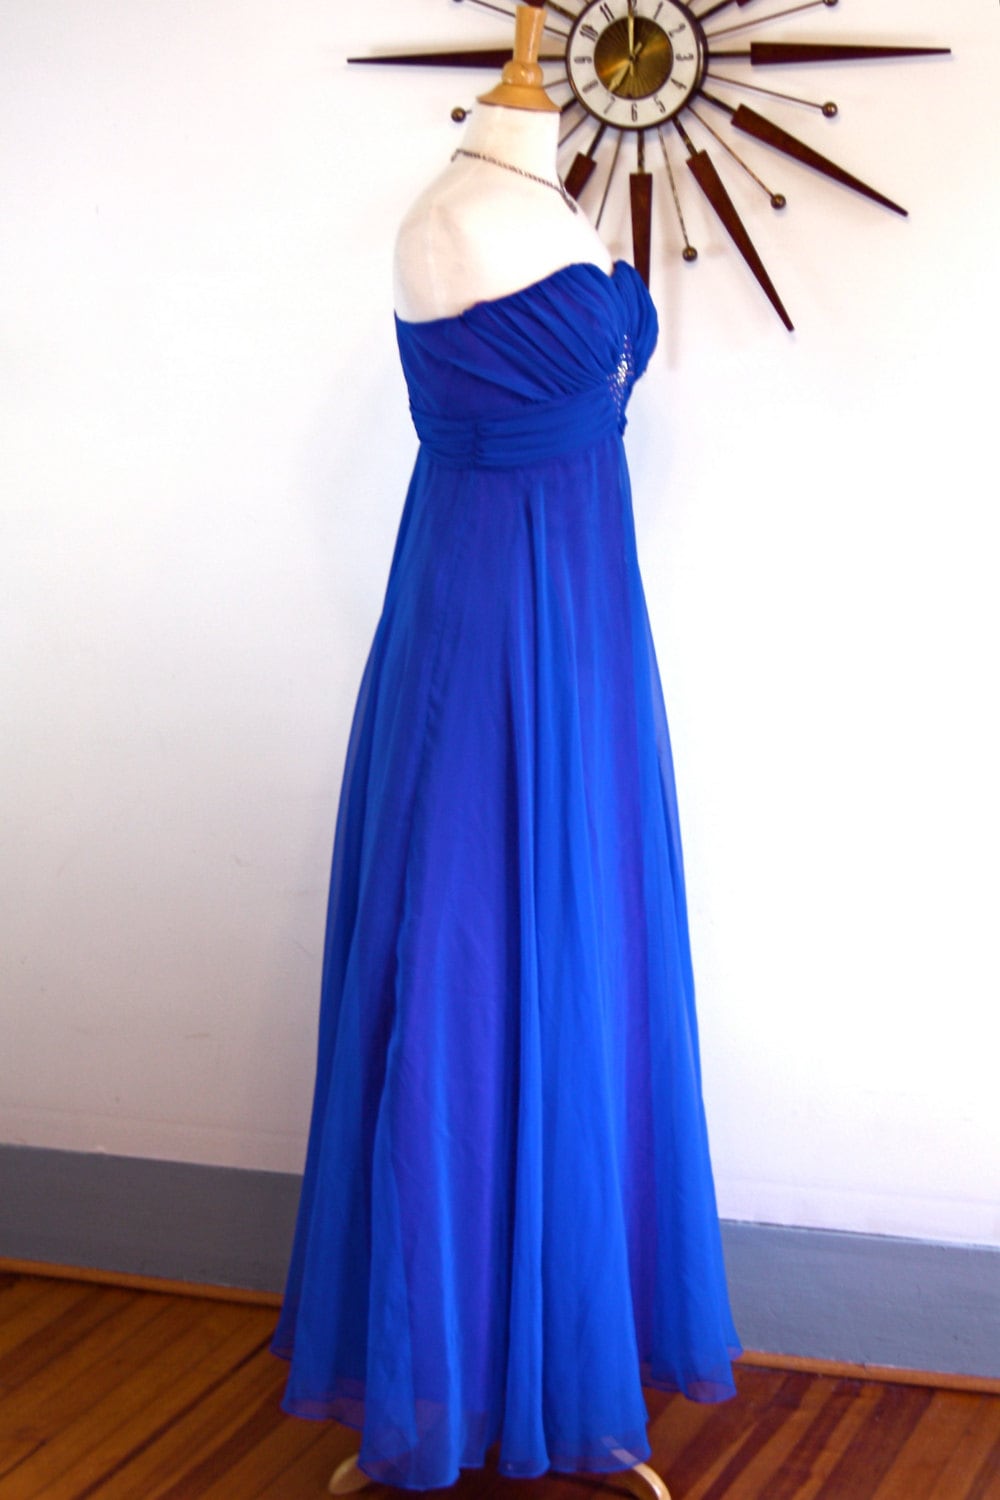 Vintage 1960's Beaded Blue Evening Gown With Rhinestones / 